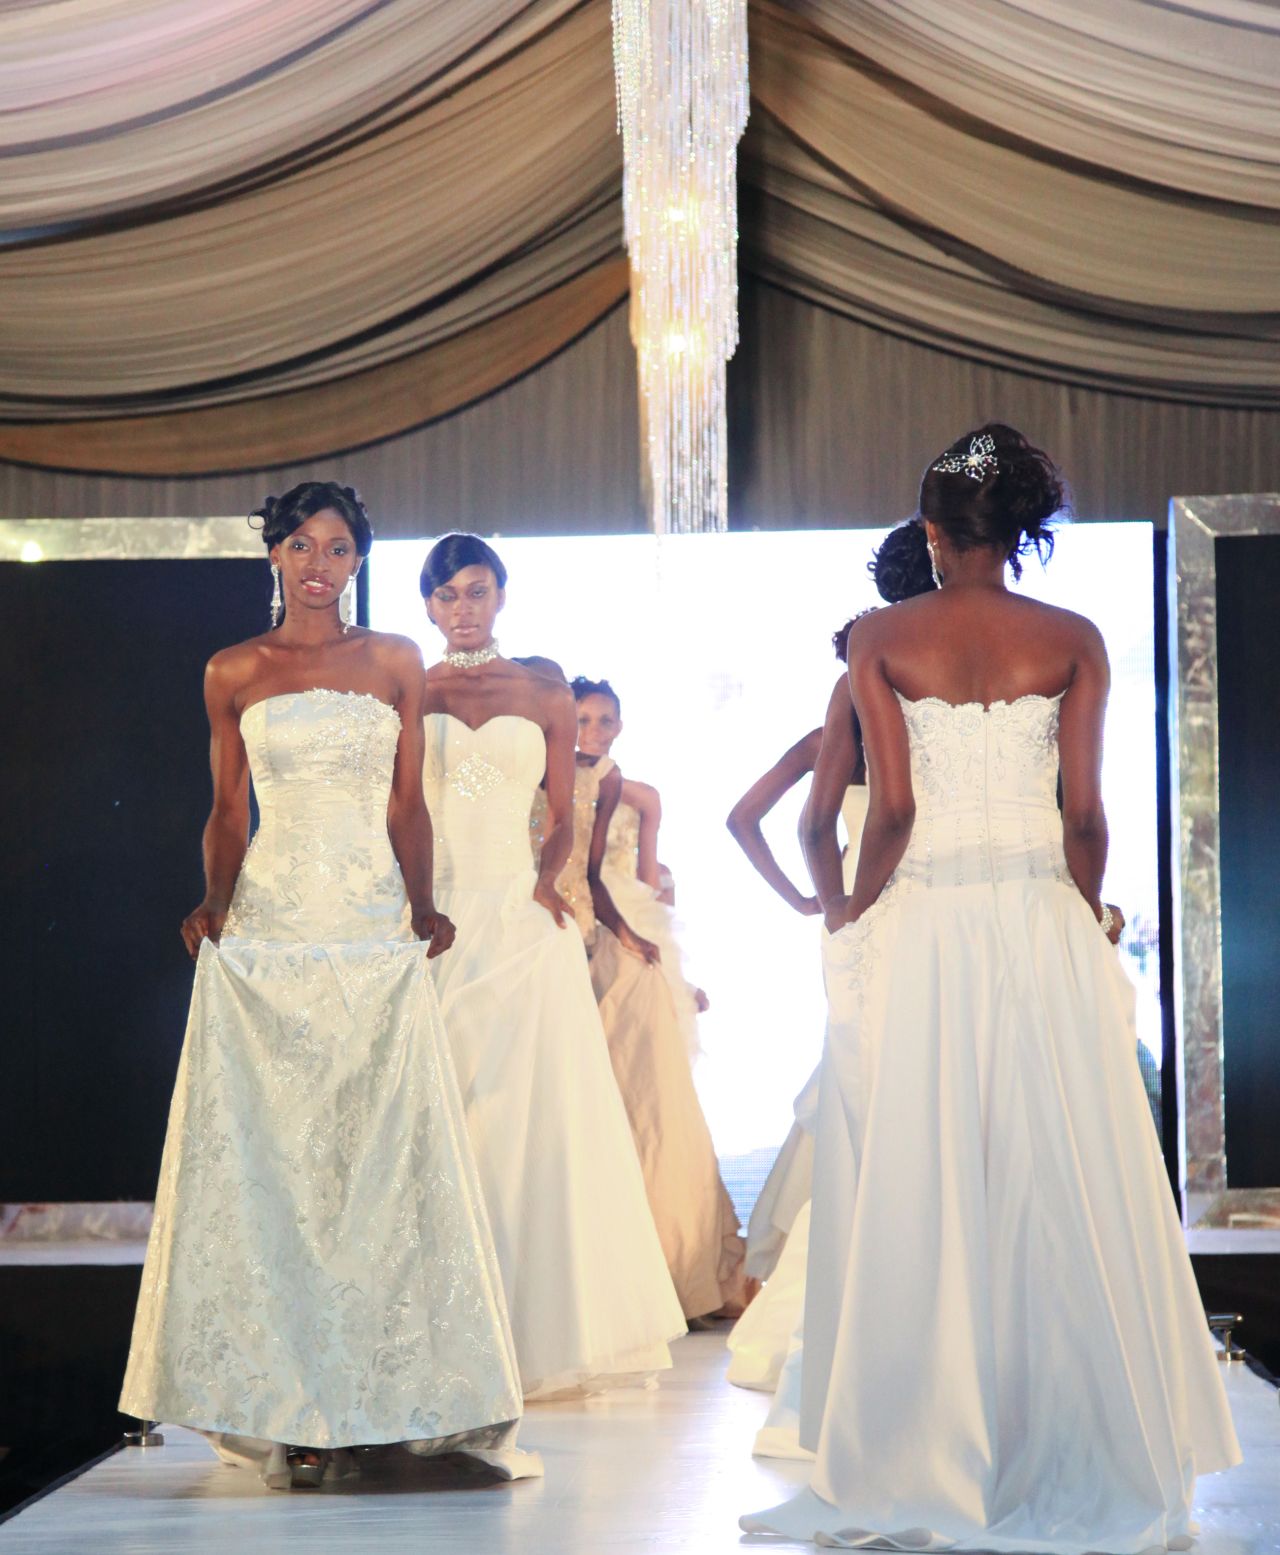 Models wear bridal gowns on the runway at a Lagos Wed Expo wedding exhibition. Organizers say about 10,000 people attended over two days.